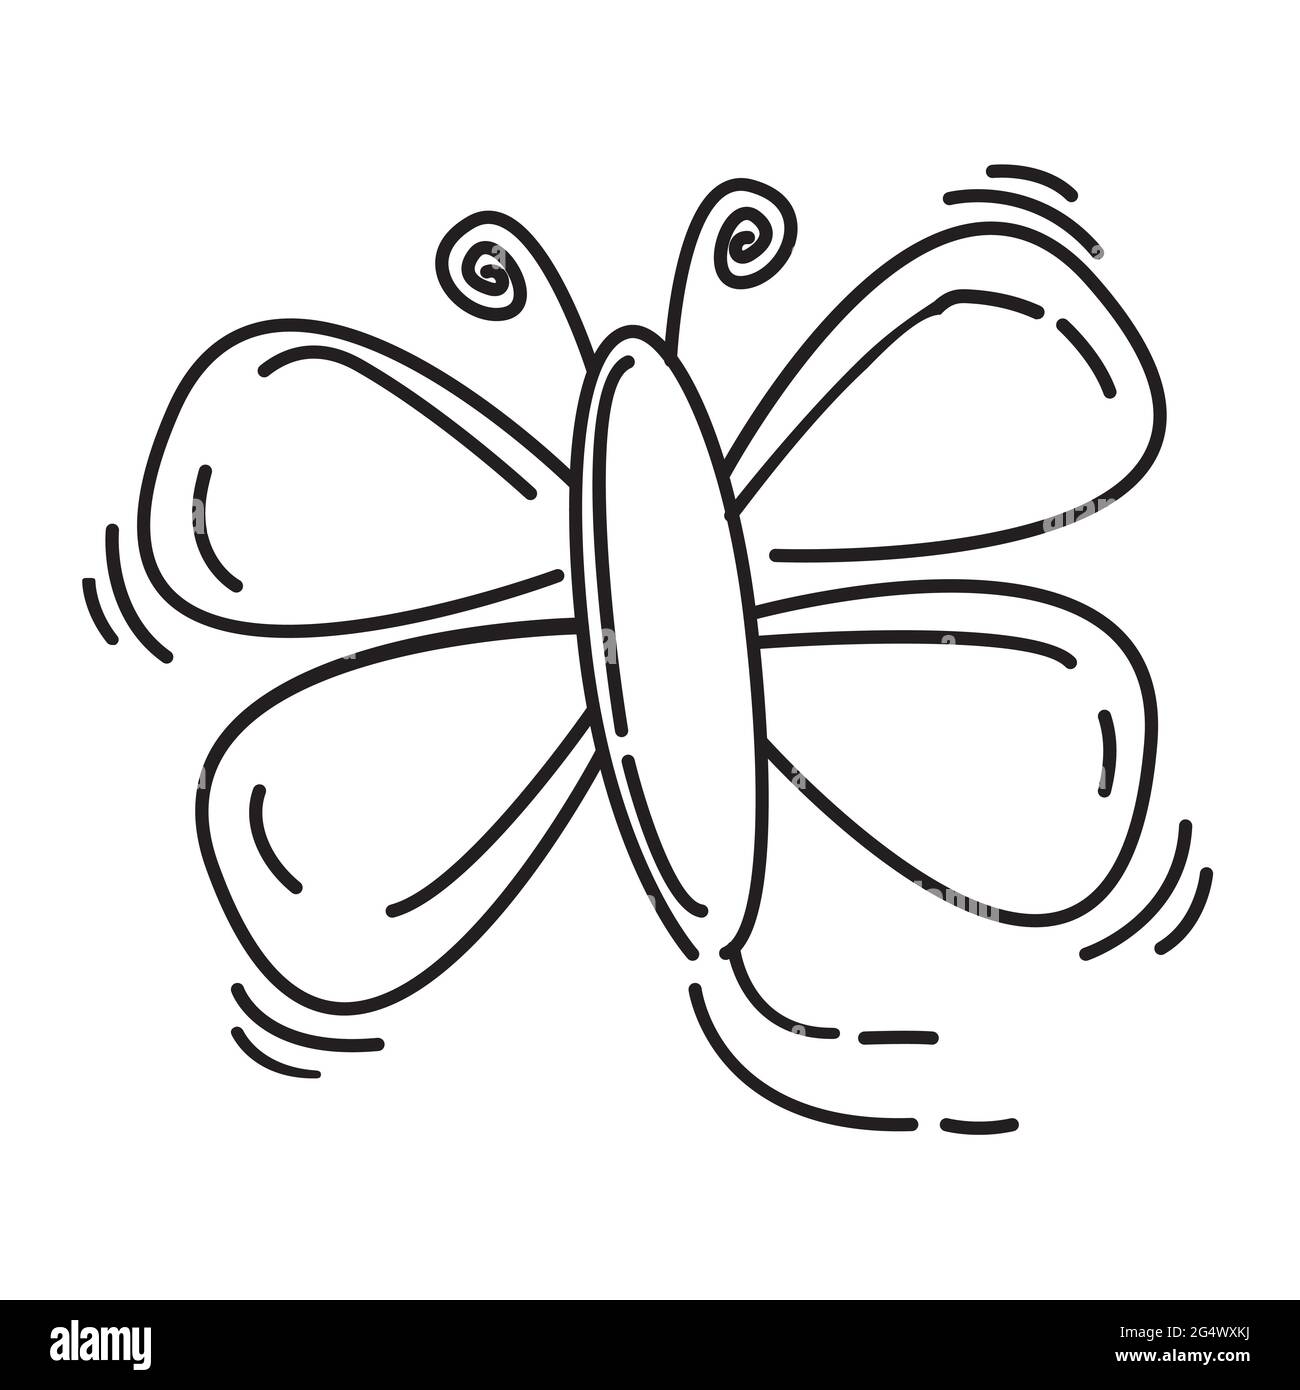 Playground kids butterfly ,playing,children,kindergarten. hand drawn icon set, outline black, doodle icon, vector icon design. Stock Vector